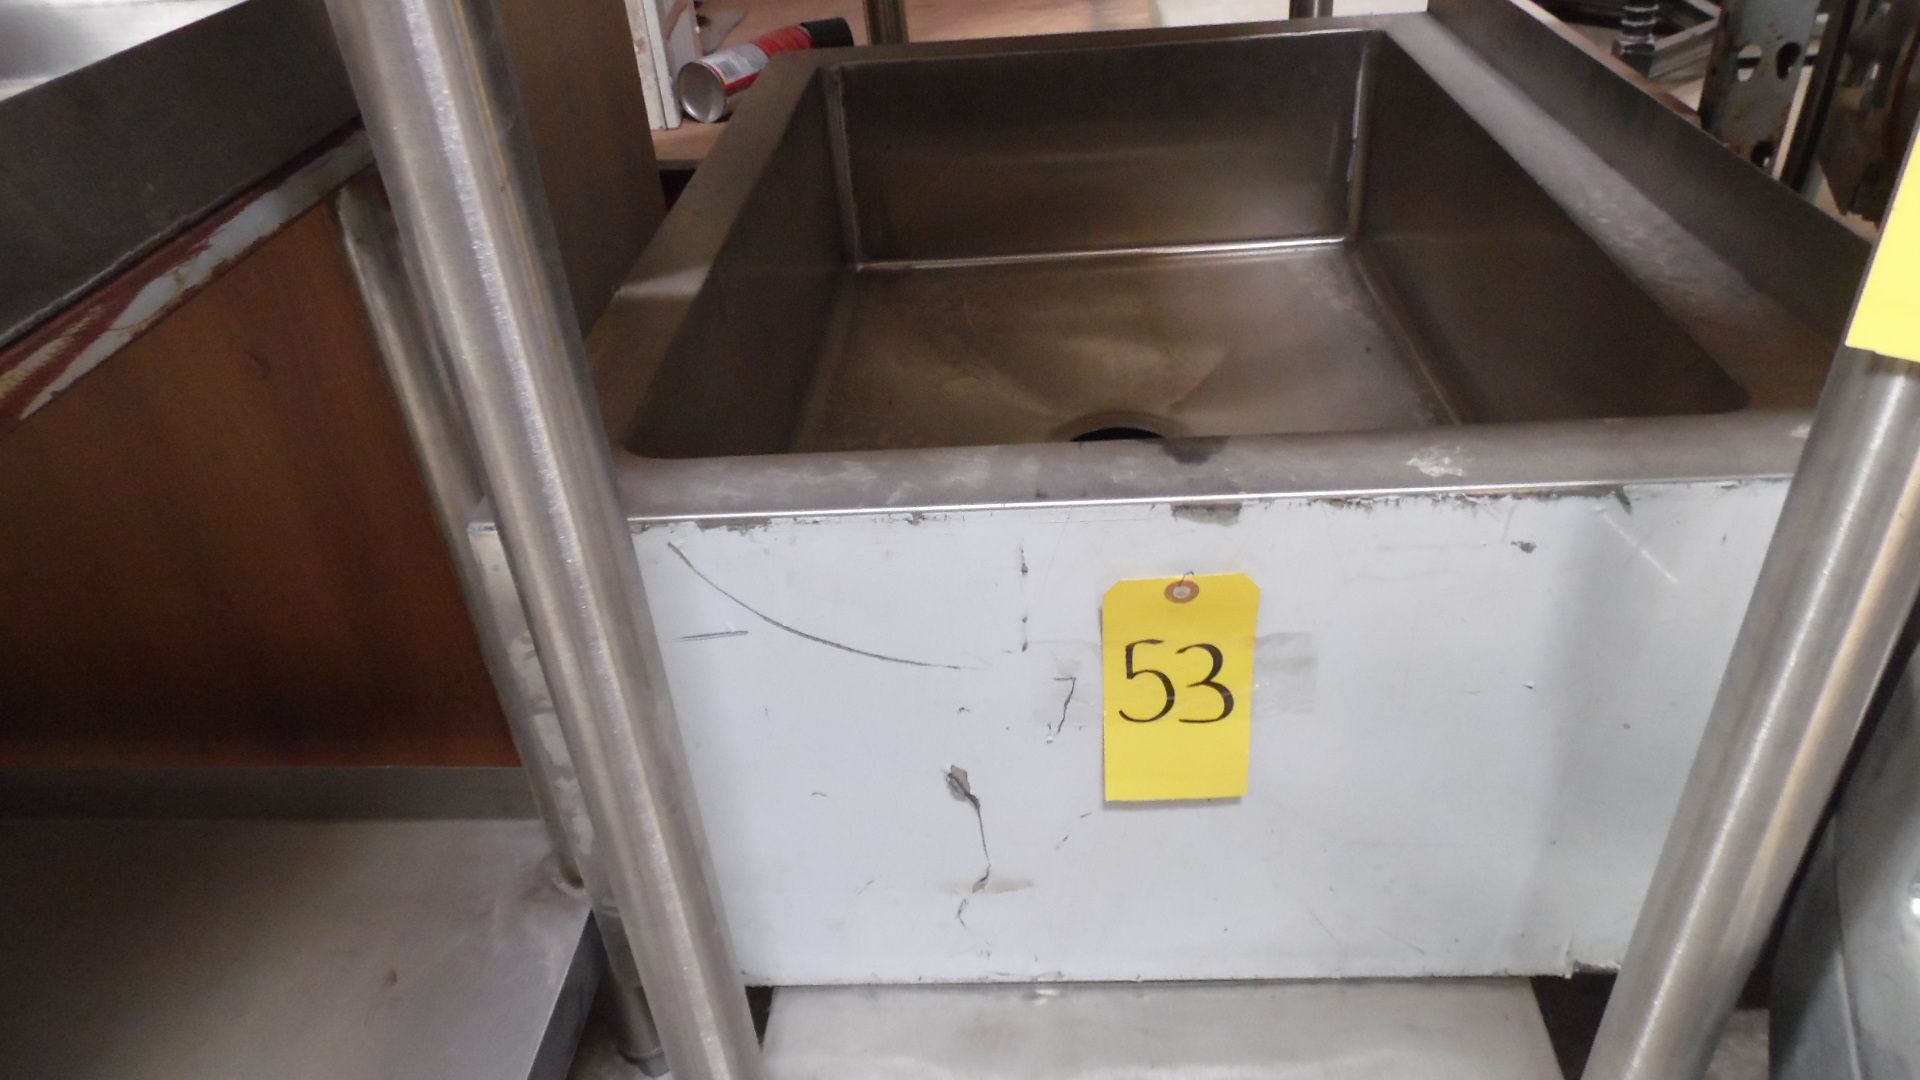 24" X 32" STAINLESS STEEL SINK